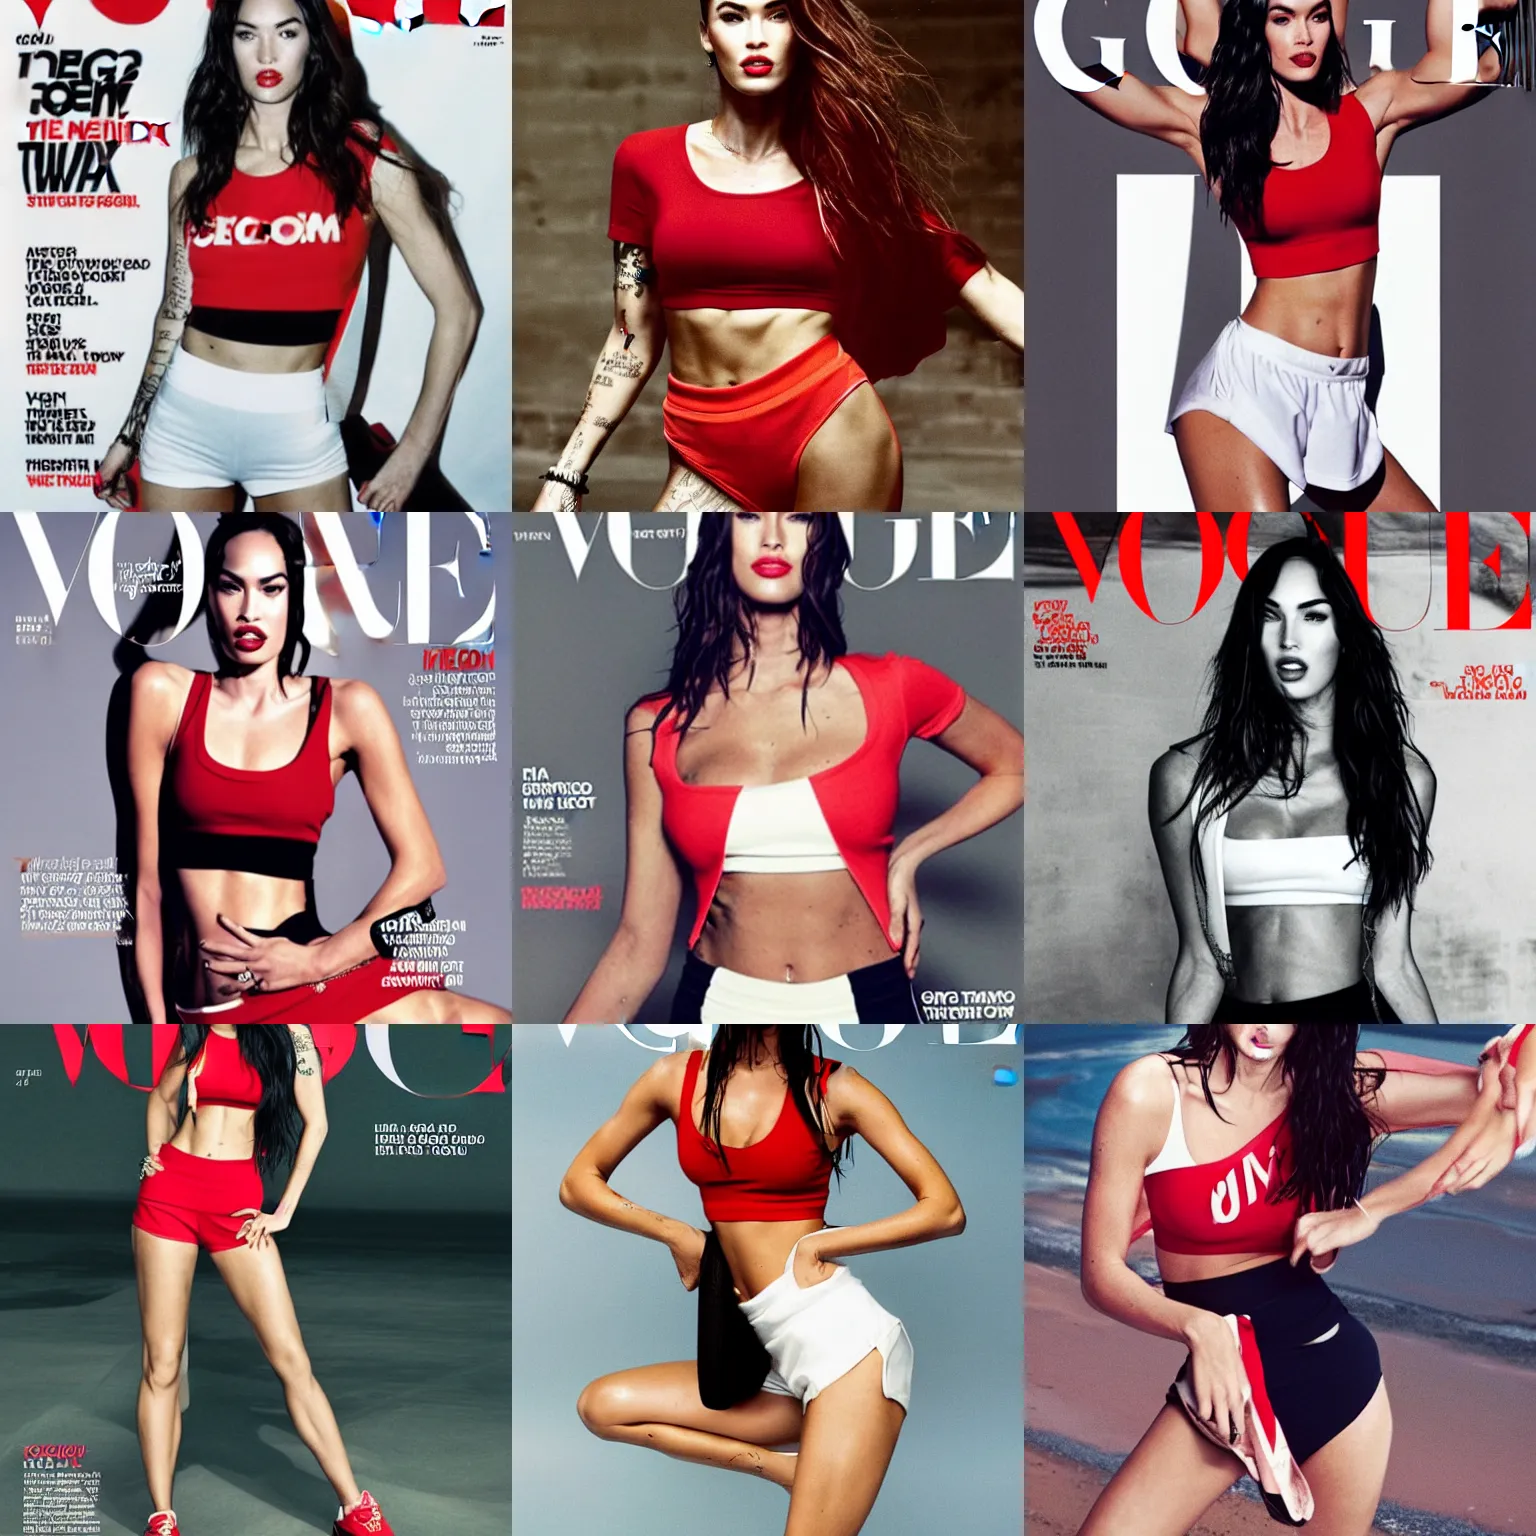 Prompt: Megan fox wearing crop red gym top with white lettering, cropped red yoga short, Vogue editorial by Mario Testino, masterwork